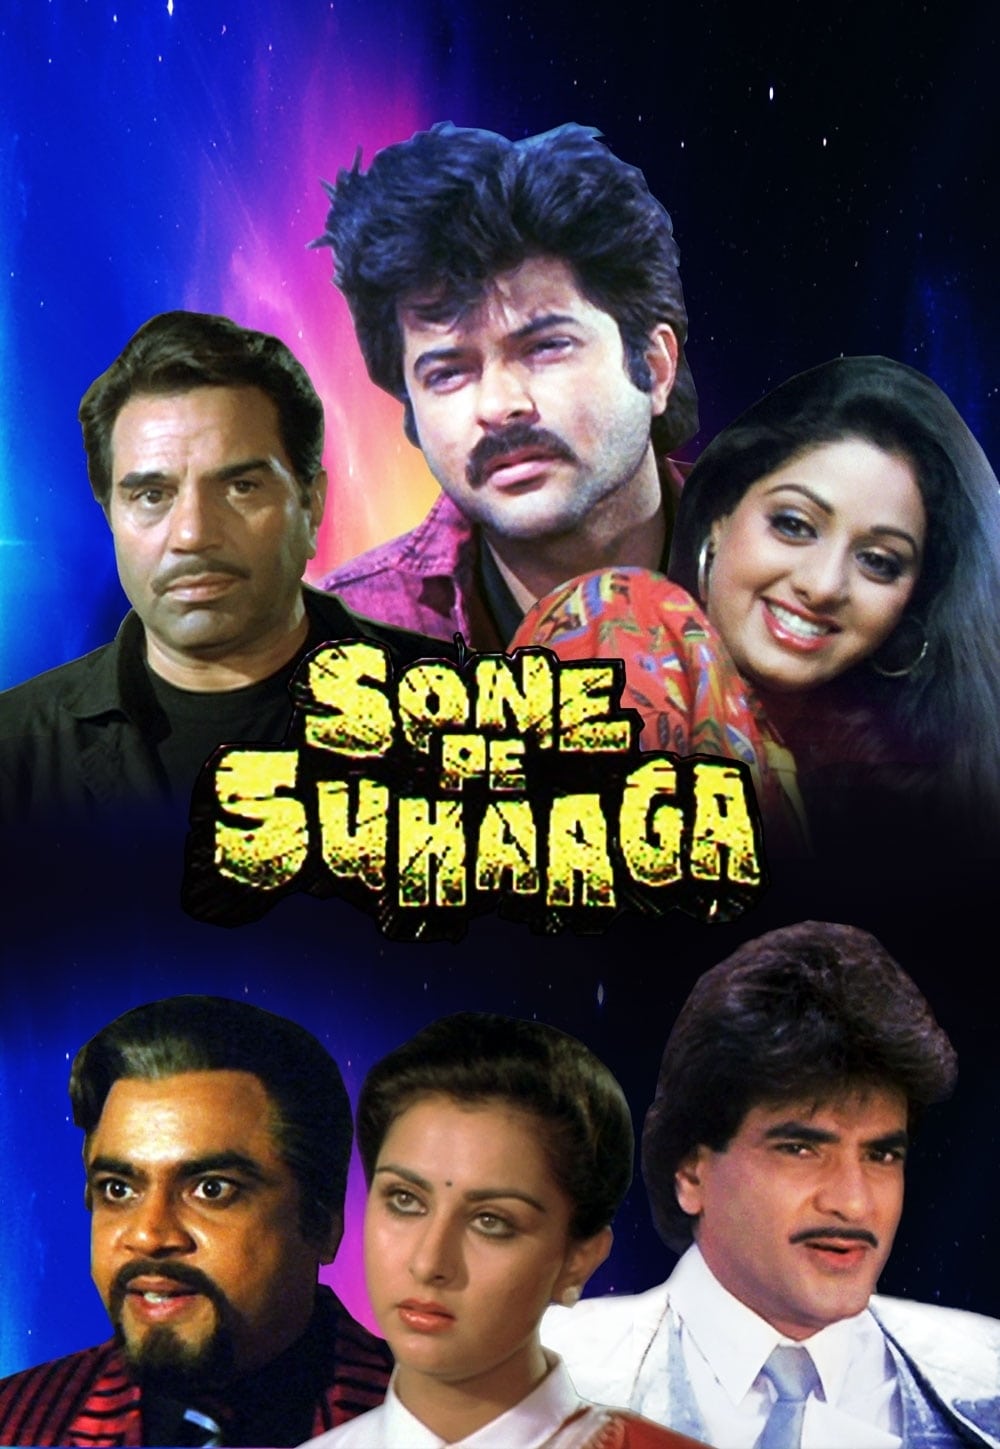 Poster for the movie "Sone Pe Suhaaga"